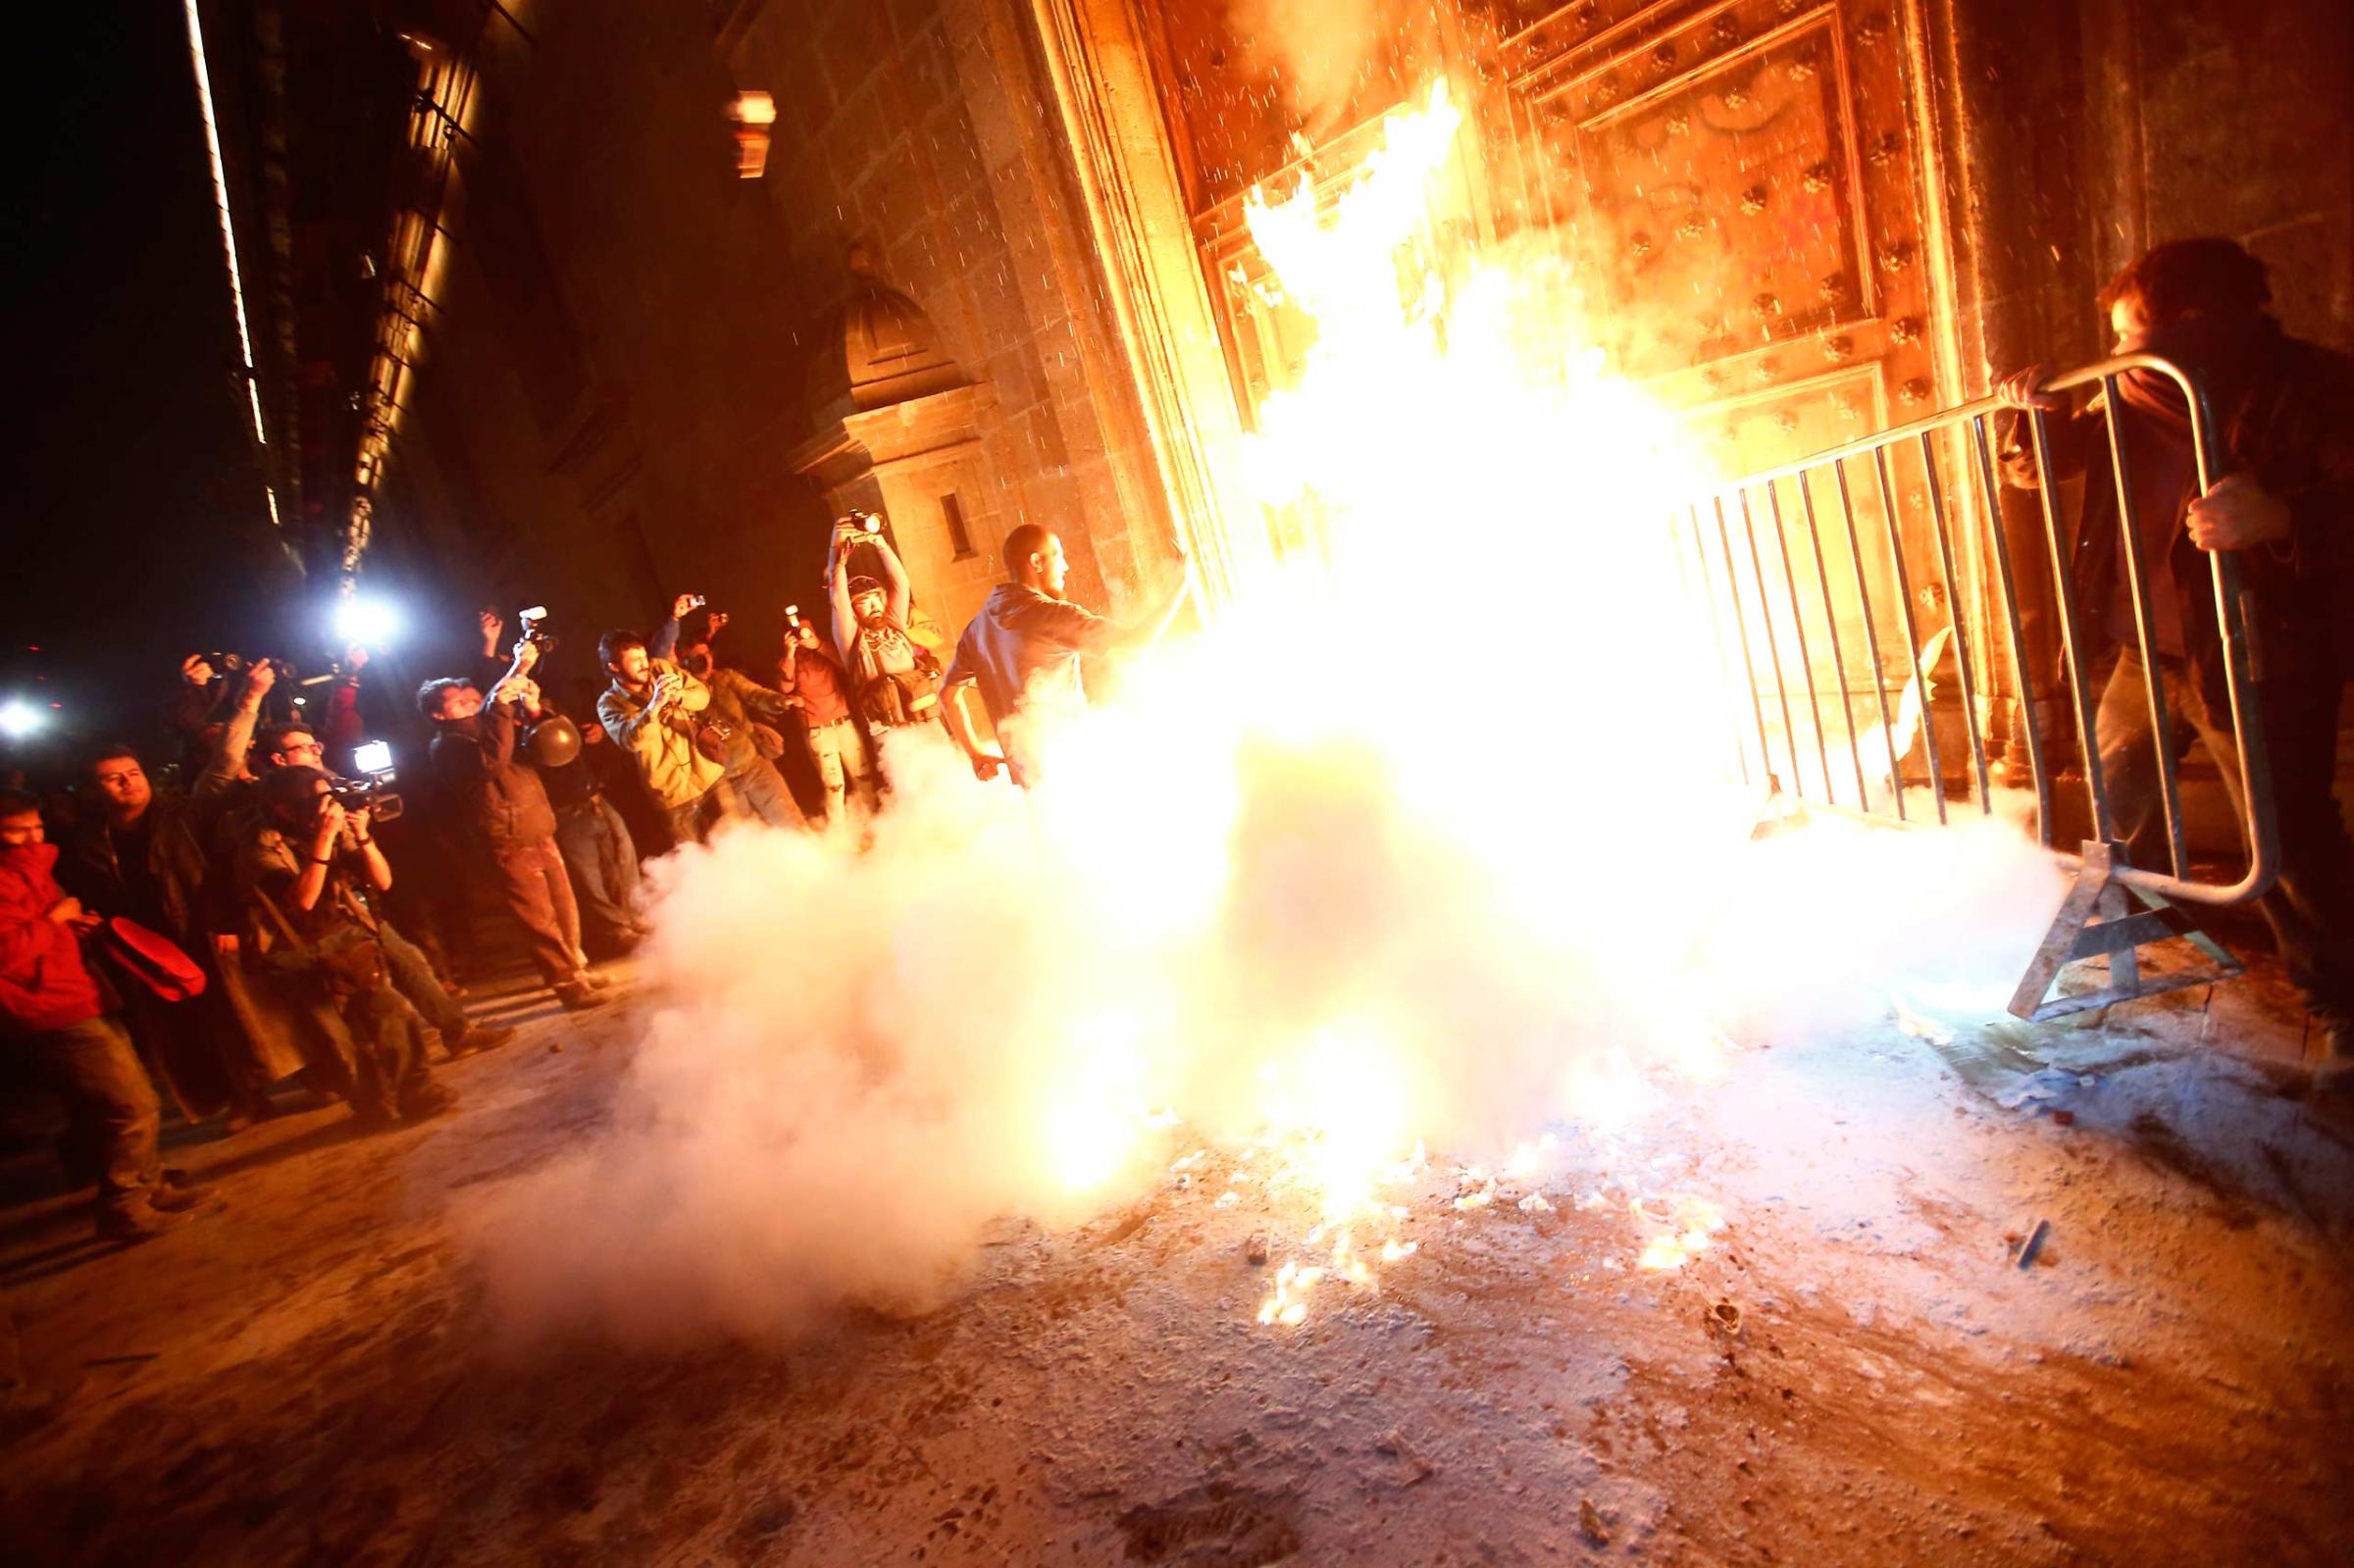 Protesters set fire to the wooden door of Mexican President Pena Nieto's ceremonial palace in Mexico City